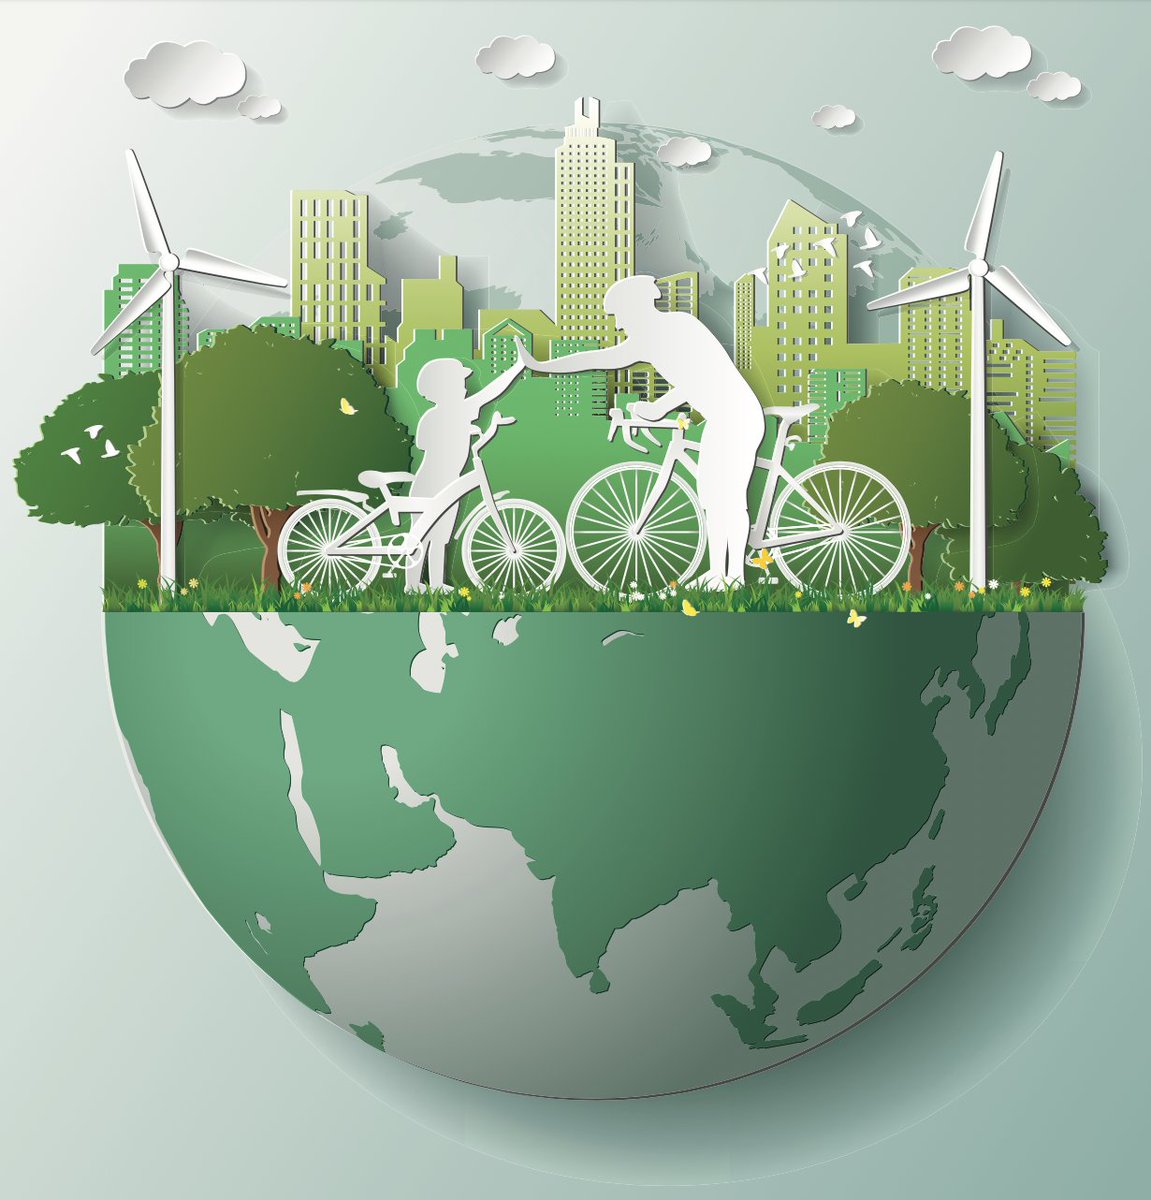 🌎 April is #EarthMonth, a time to celebrate our beautiful planet and take action to protect it. This #EarthDay, let’s pedal towards change by embracing bicycling, an eco-friendly way to make a difference. Join millions worldwide in cycling for our Earth! 🚴💚🌍 #BikeFairfax